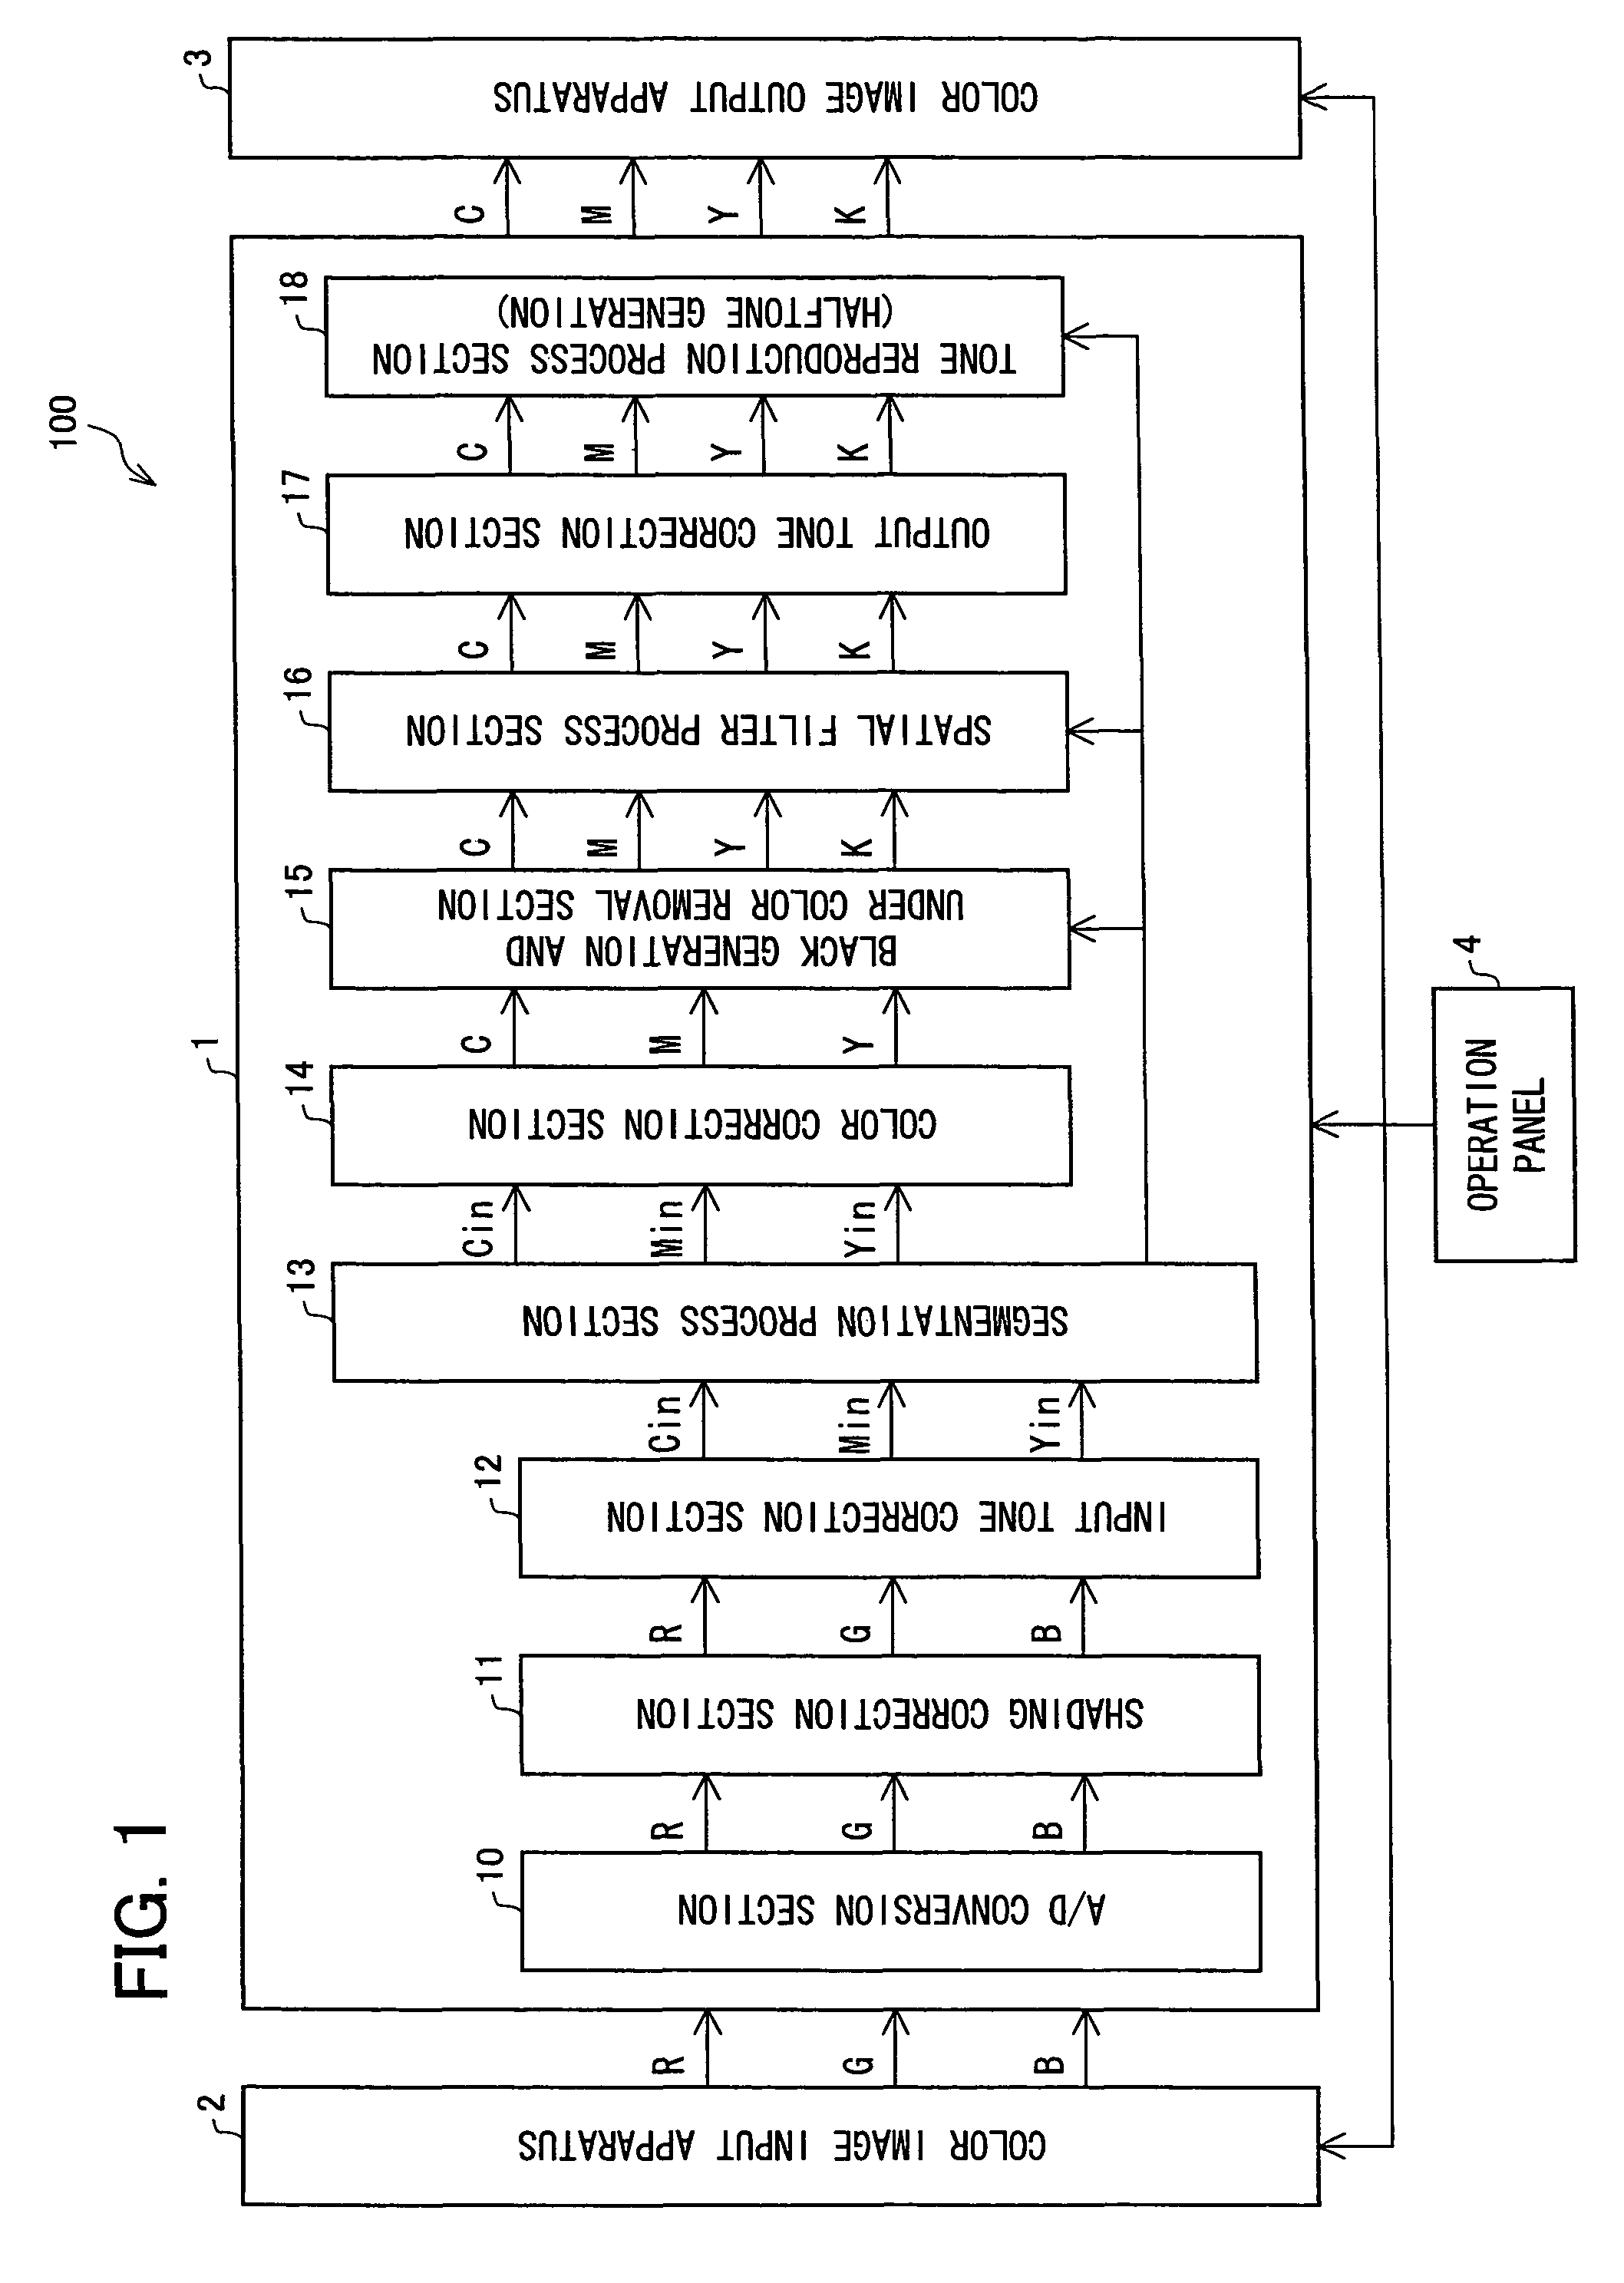 Image processing and/or forming apparatus for performing black generation and under color removal processes on selected pixels, image processing and/or forming method for the same, and computer-readable storage medium for storing program for causing computer to function as image processing and/or forming apparatus for the same